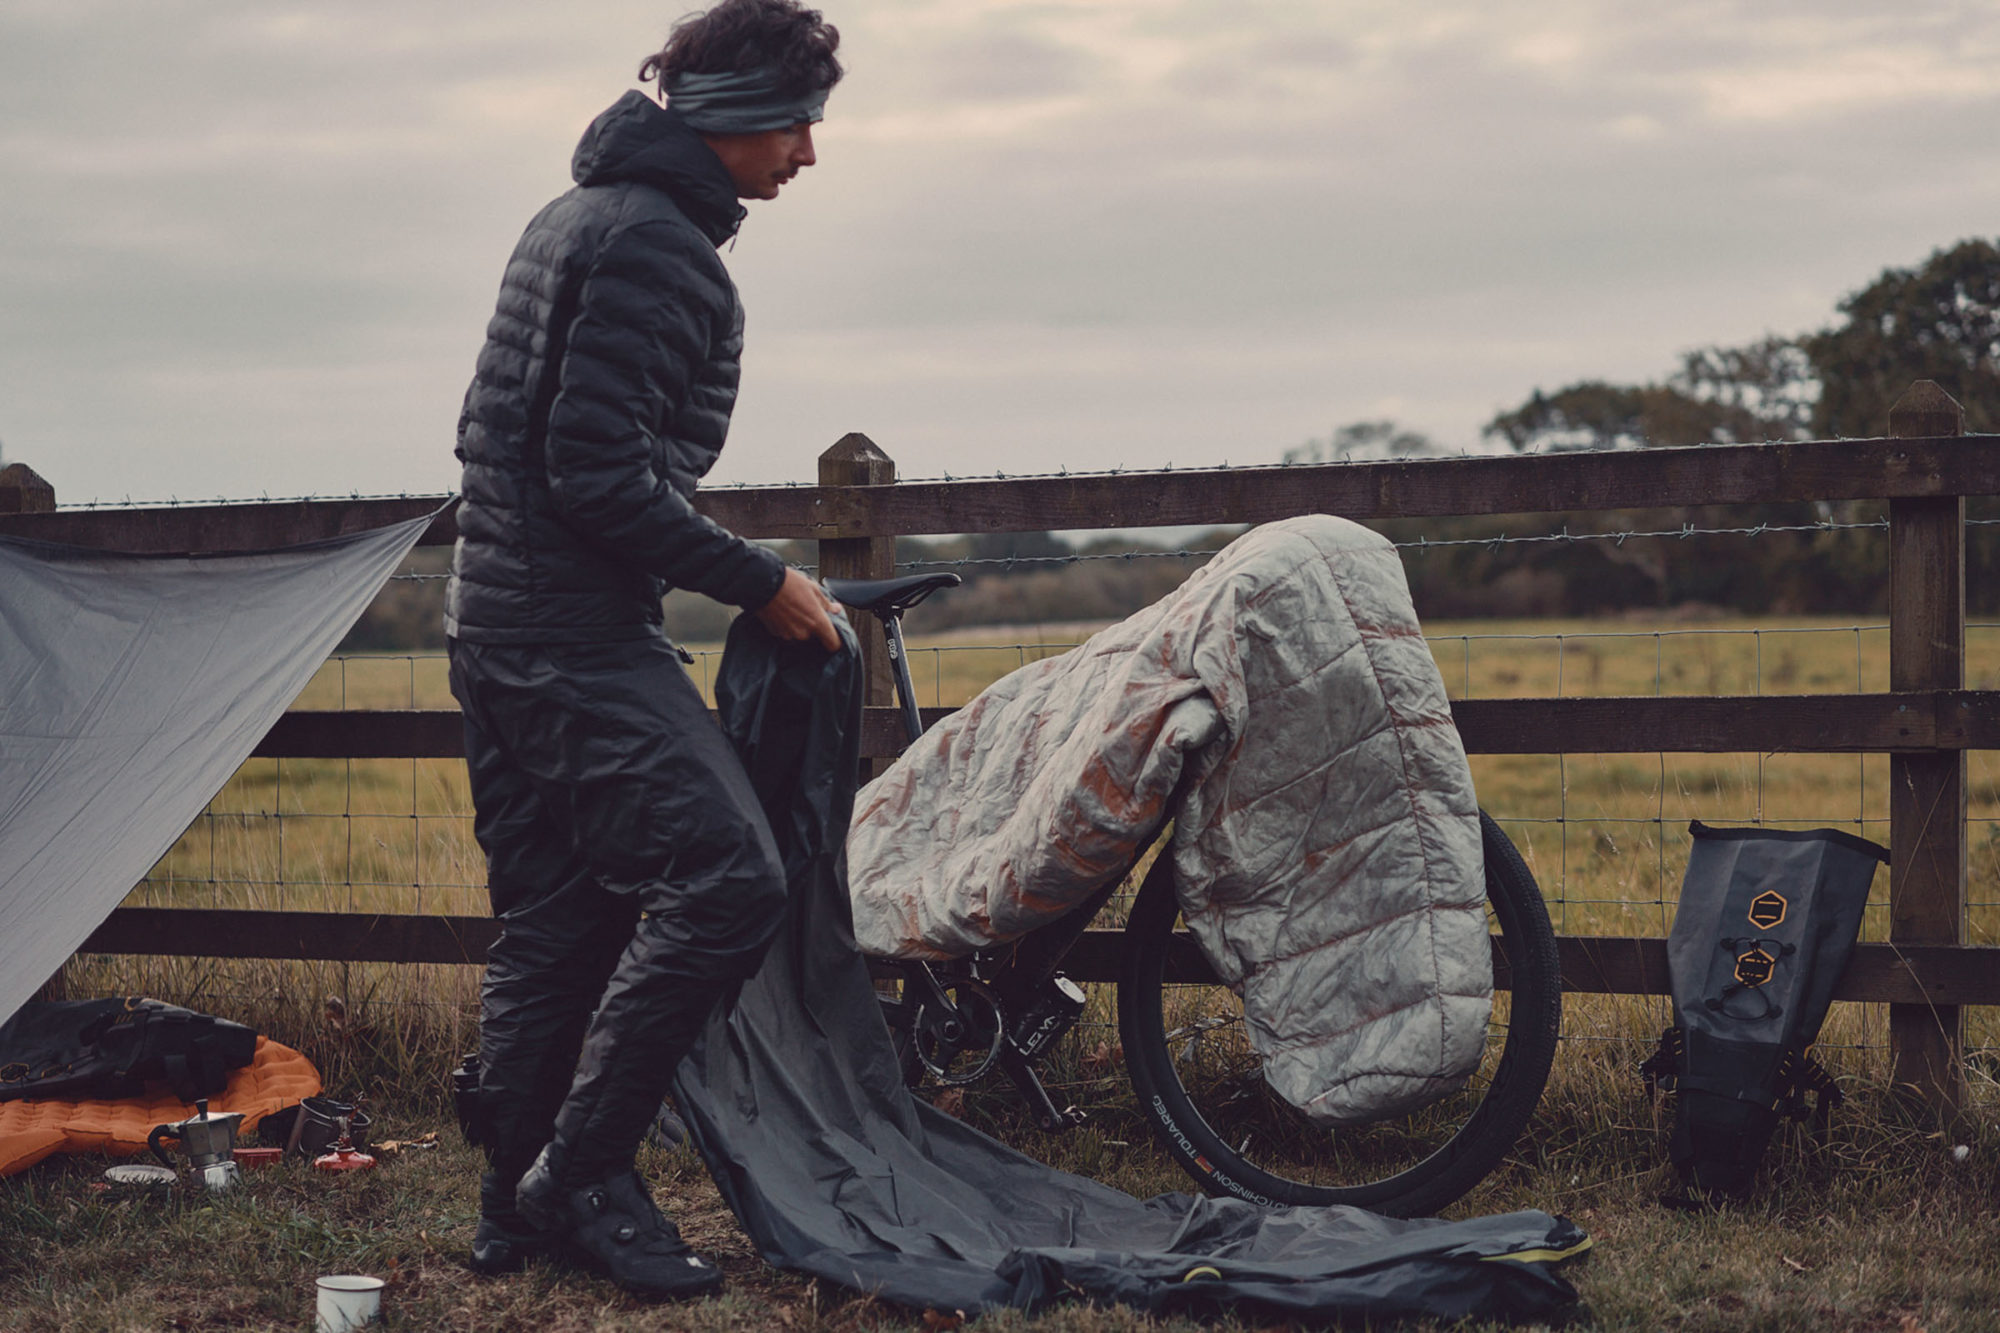 Pedaled Odyssey insulated pants